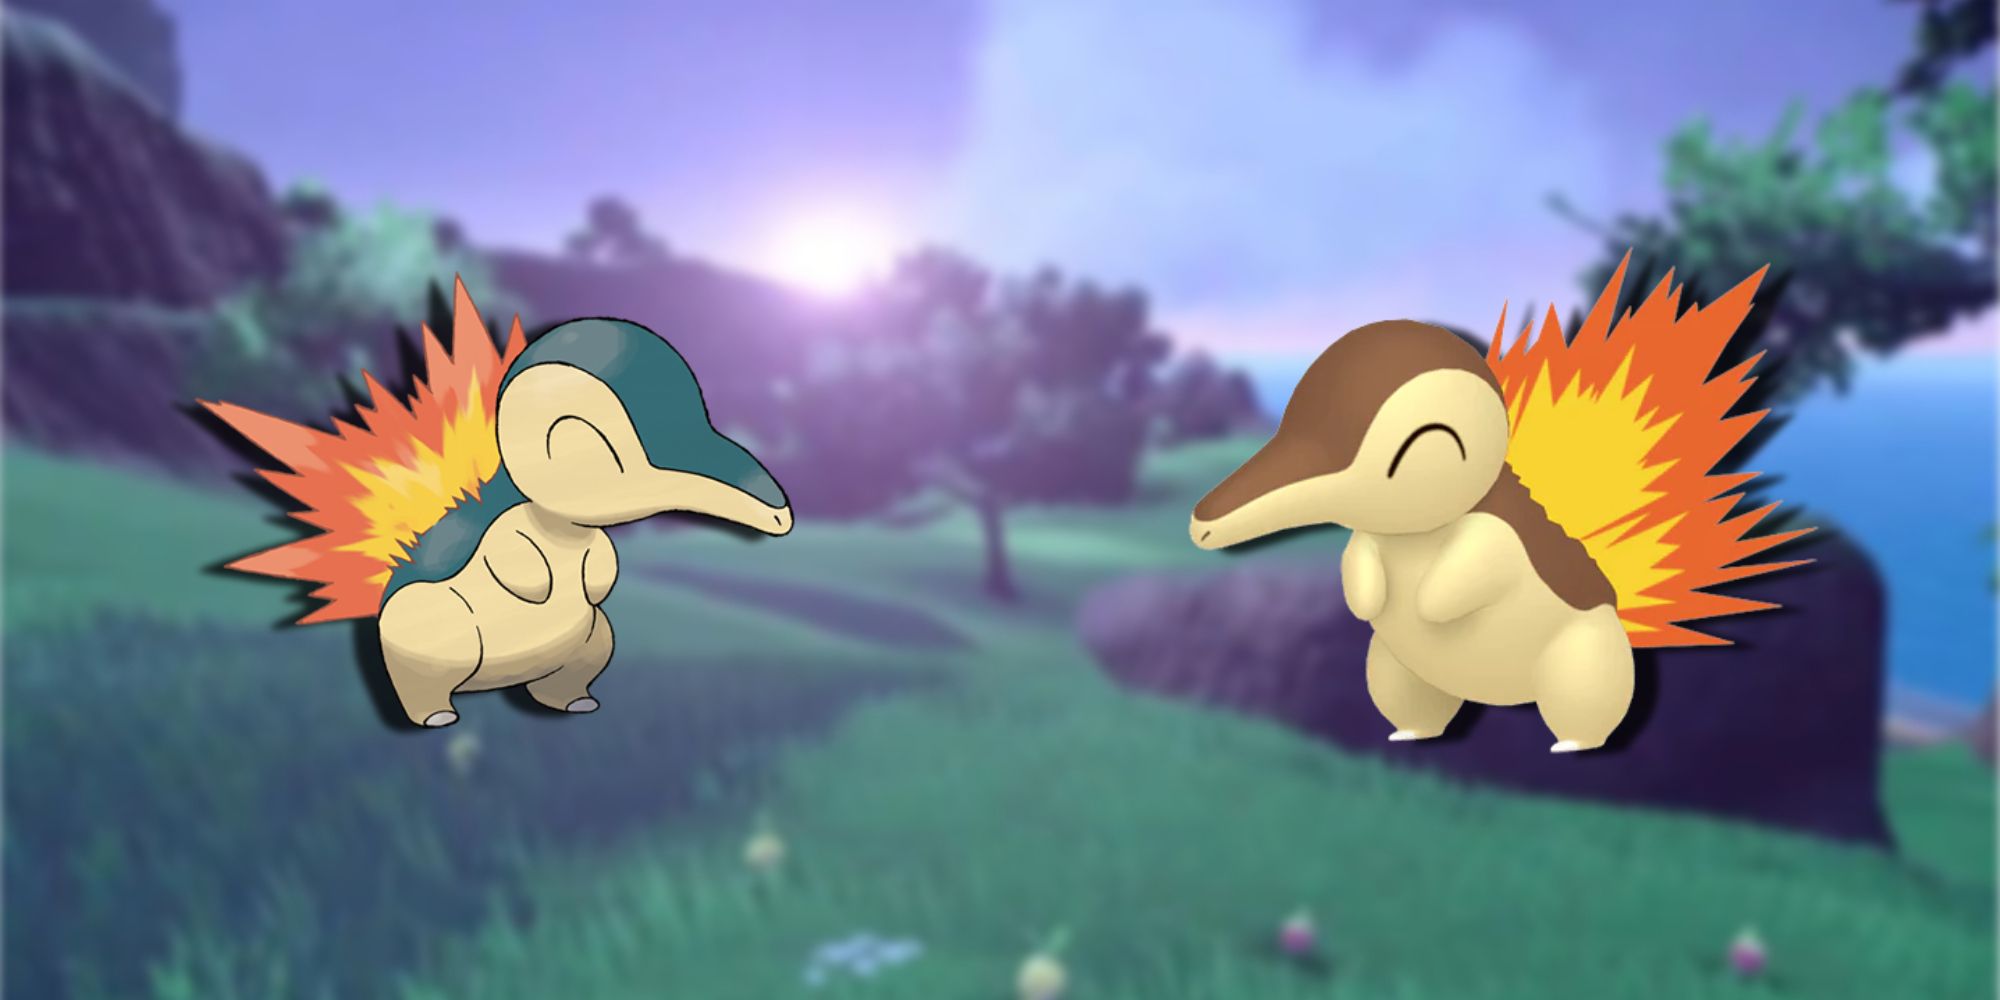 The pokemon Cyndaquil looks cute but could easily kill a human if provoked